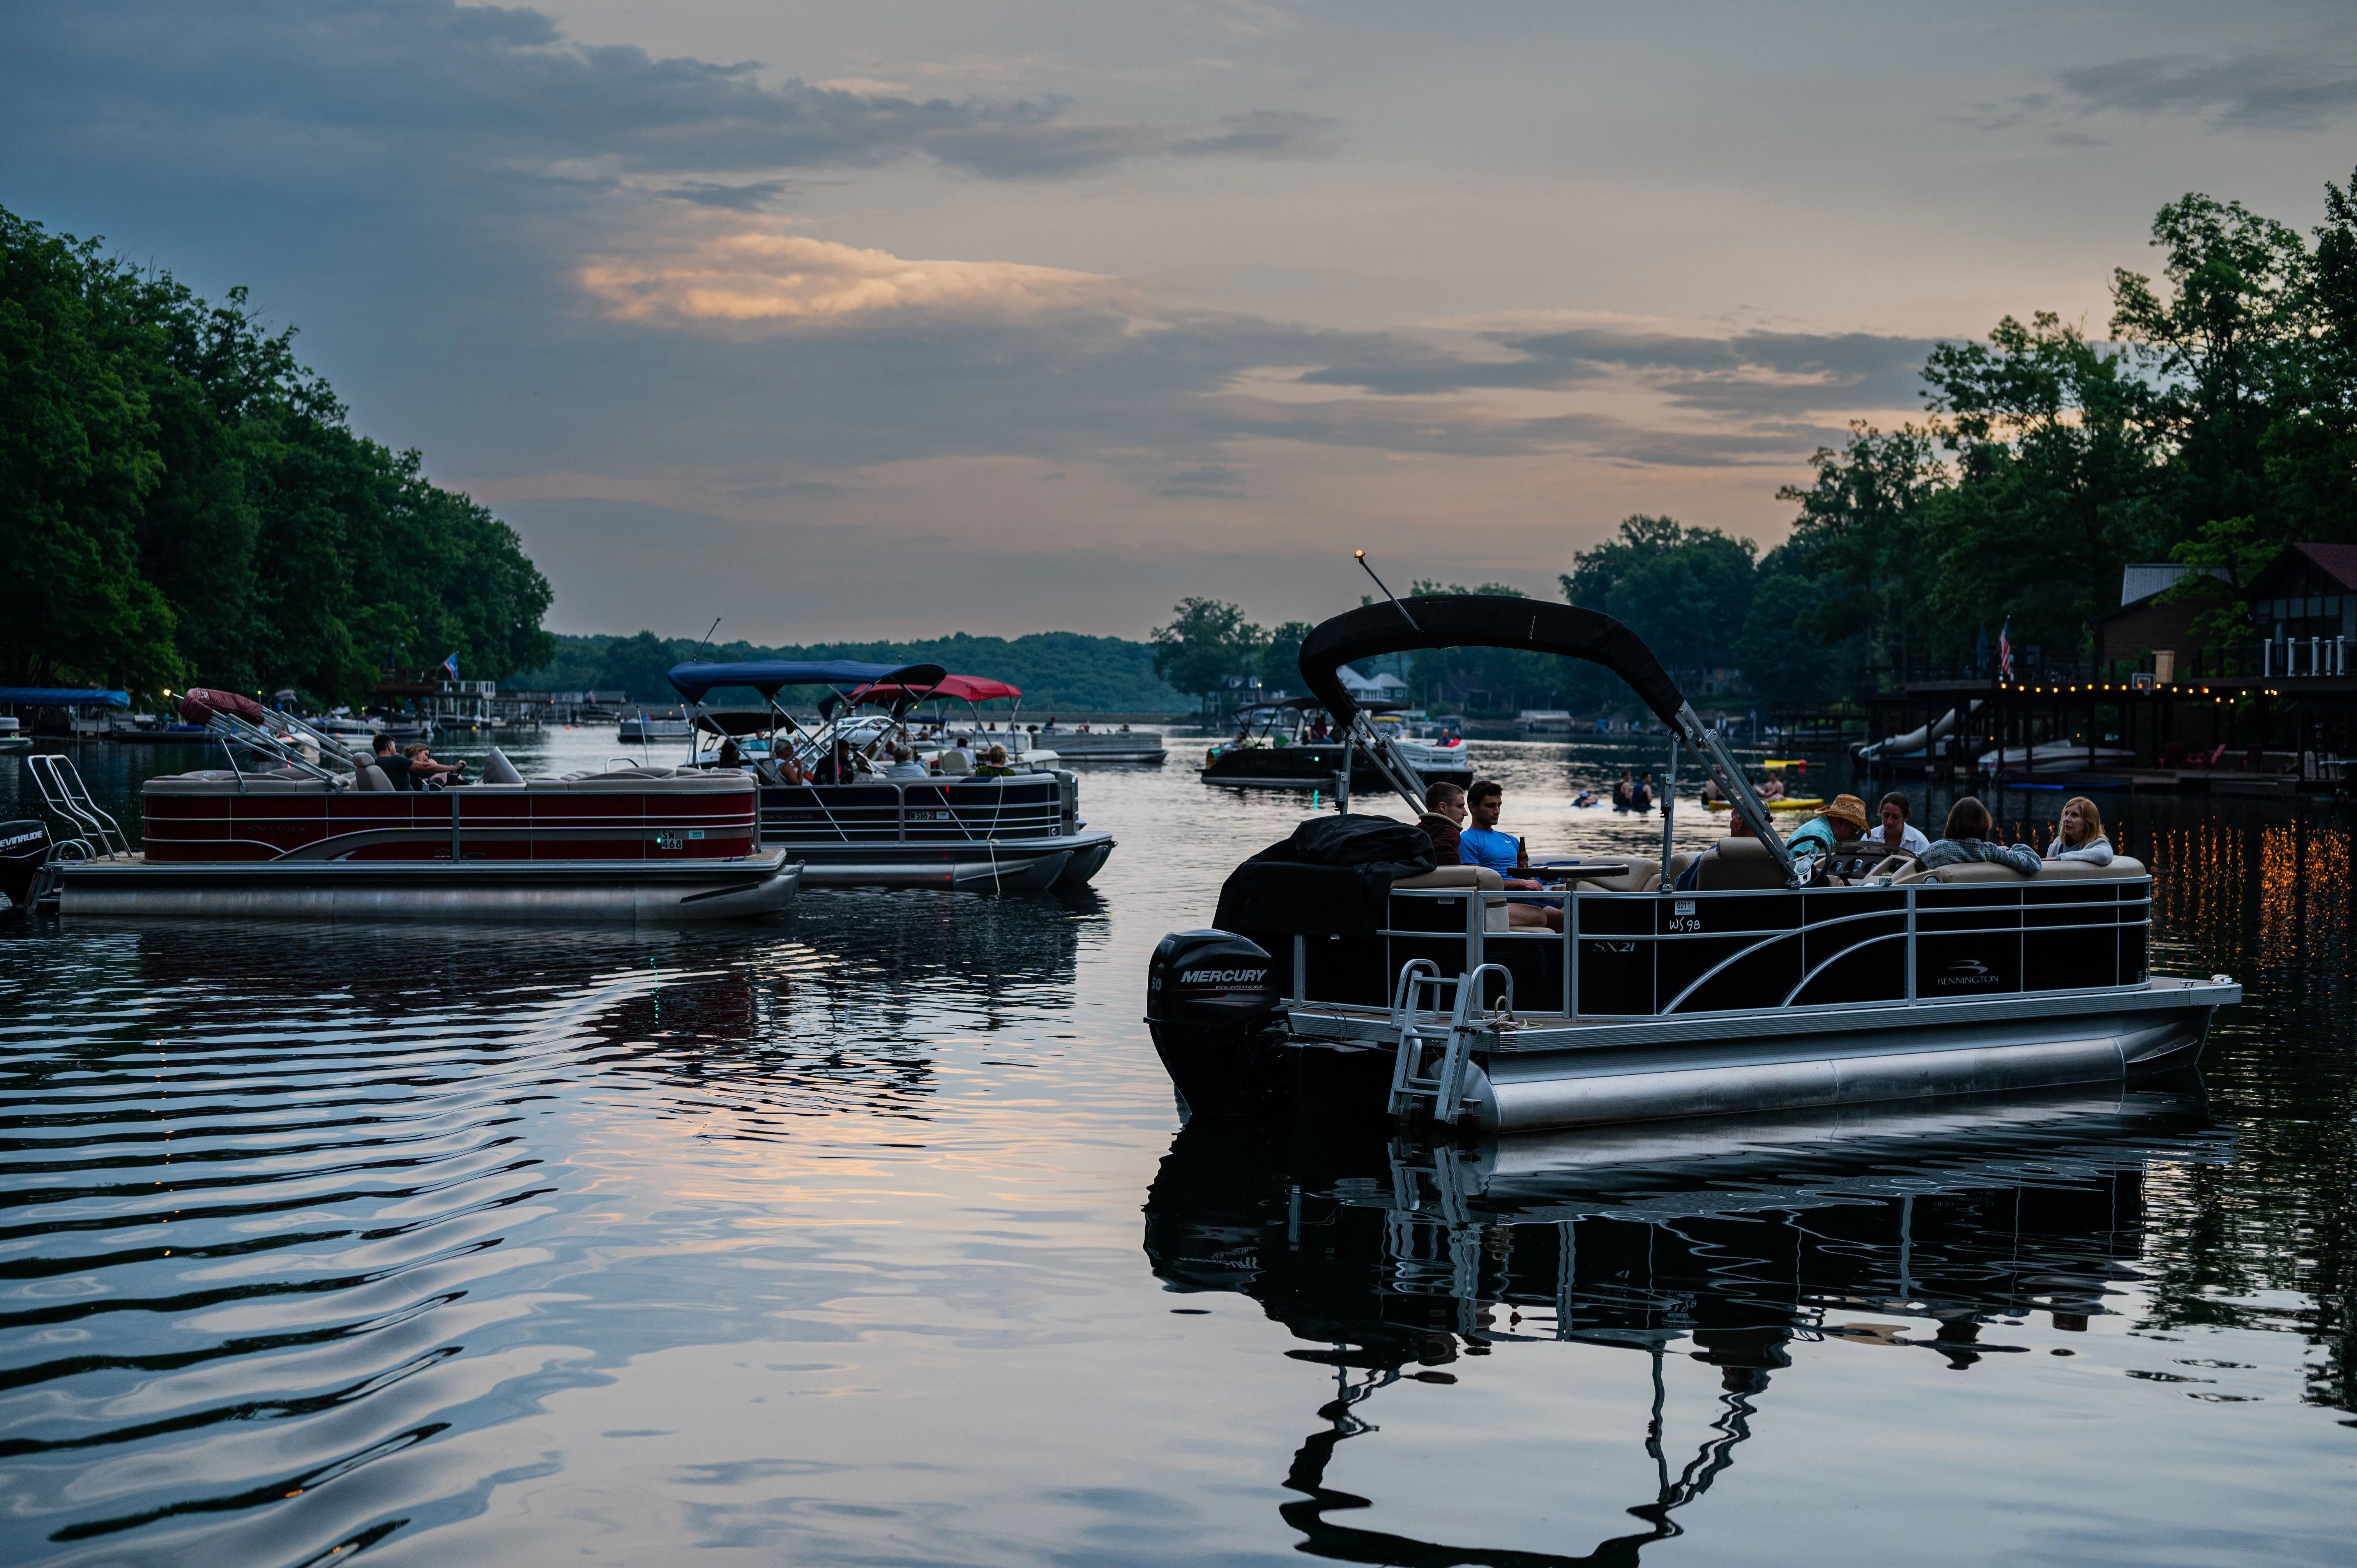 Pontoons and boats moored on a calm river at twilight with trees and a hint of sunset in the background.